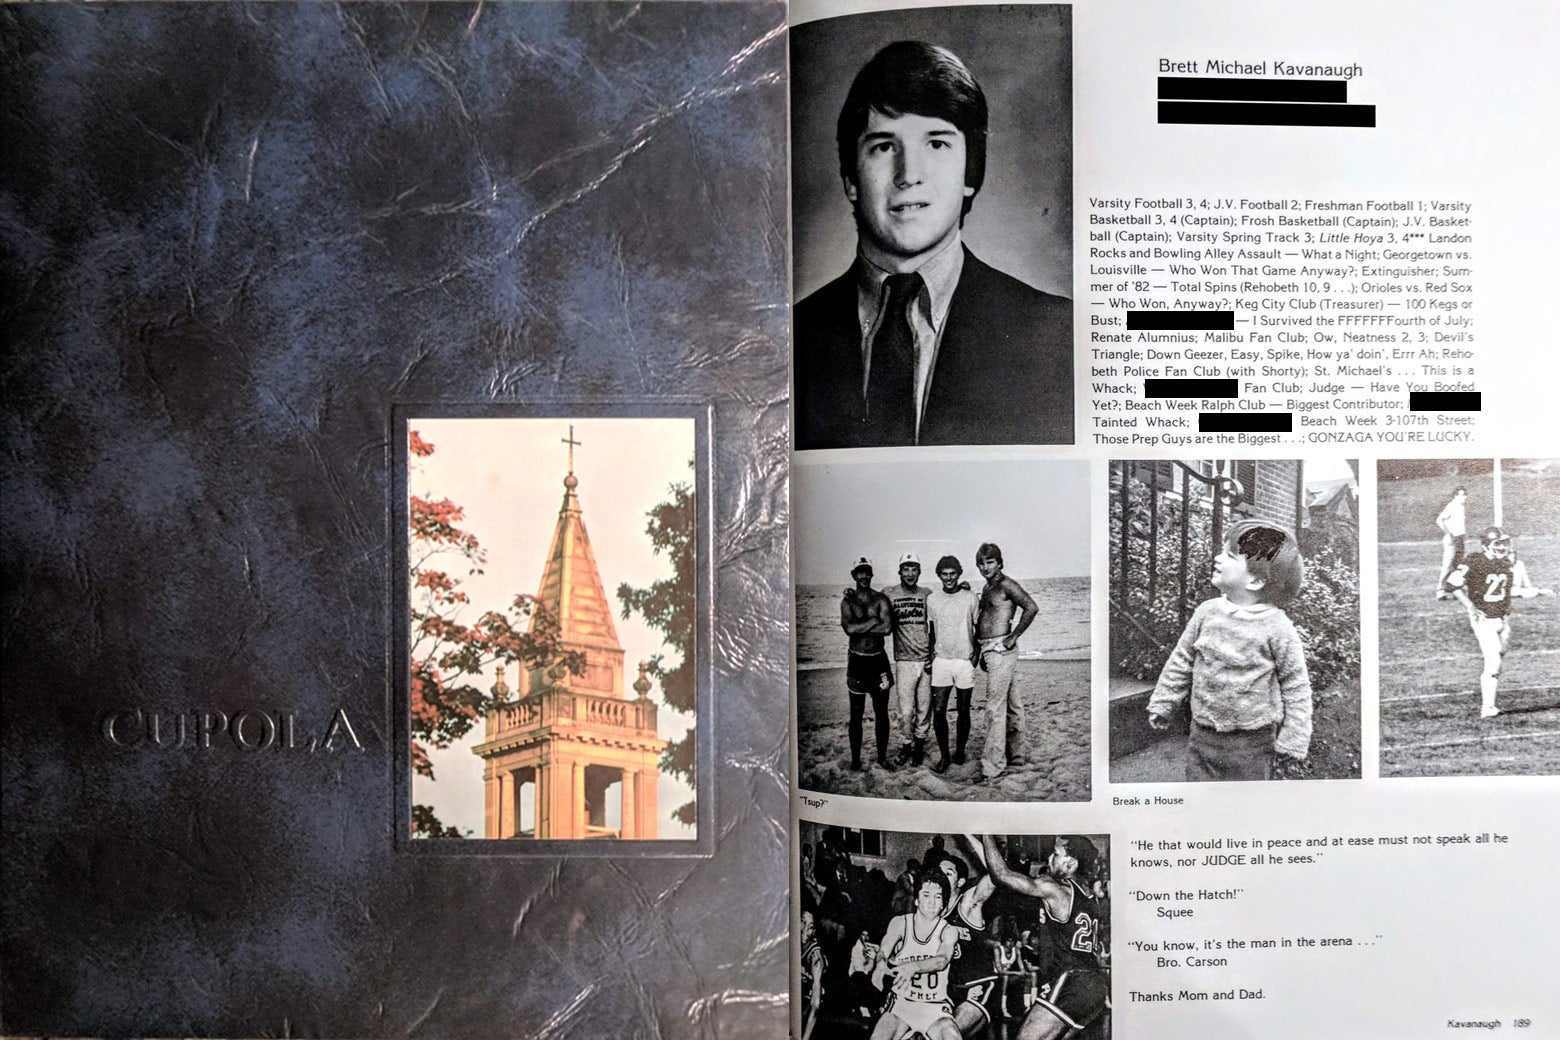 Side by side: a yearbook cover with "Cupola" on top and Brett Kavanaugh's yearbook page.